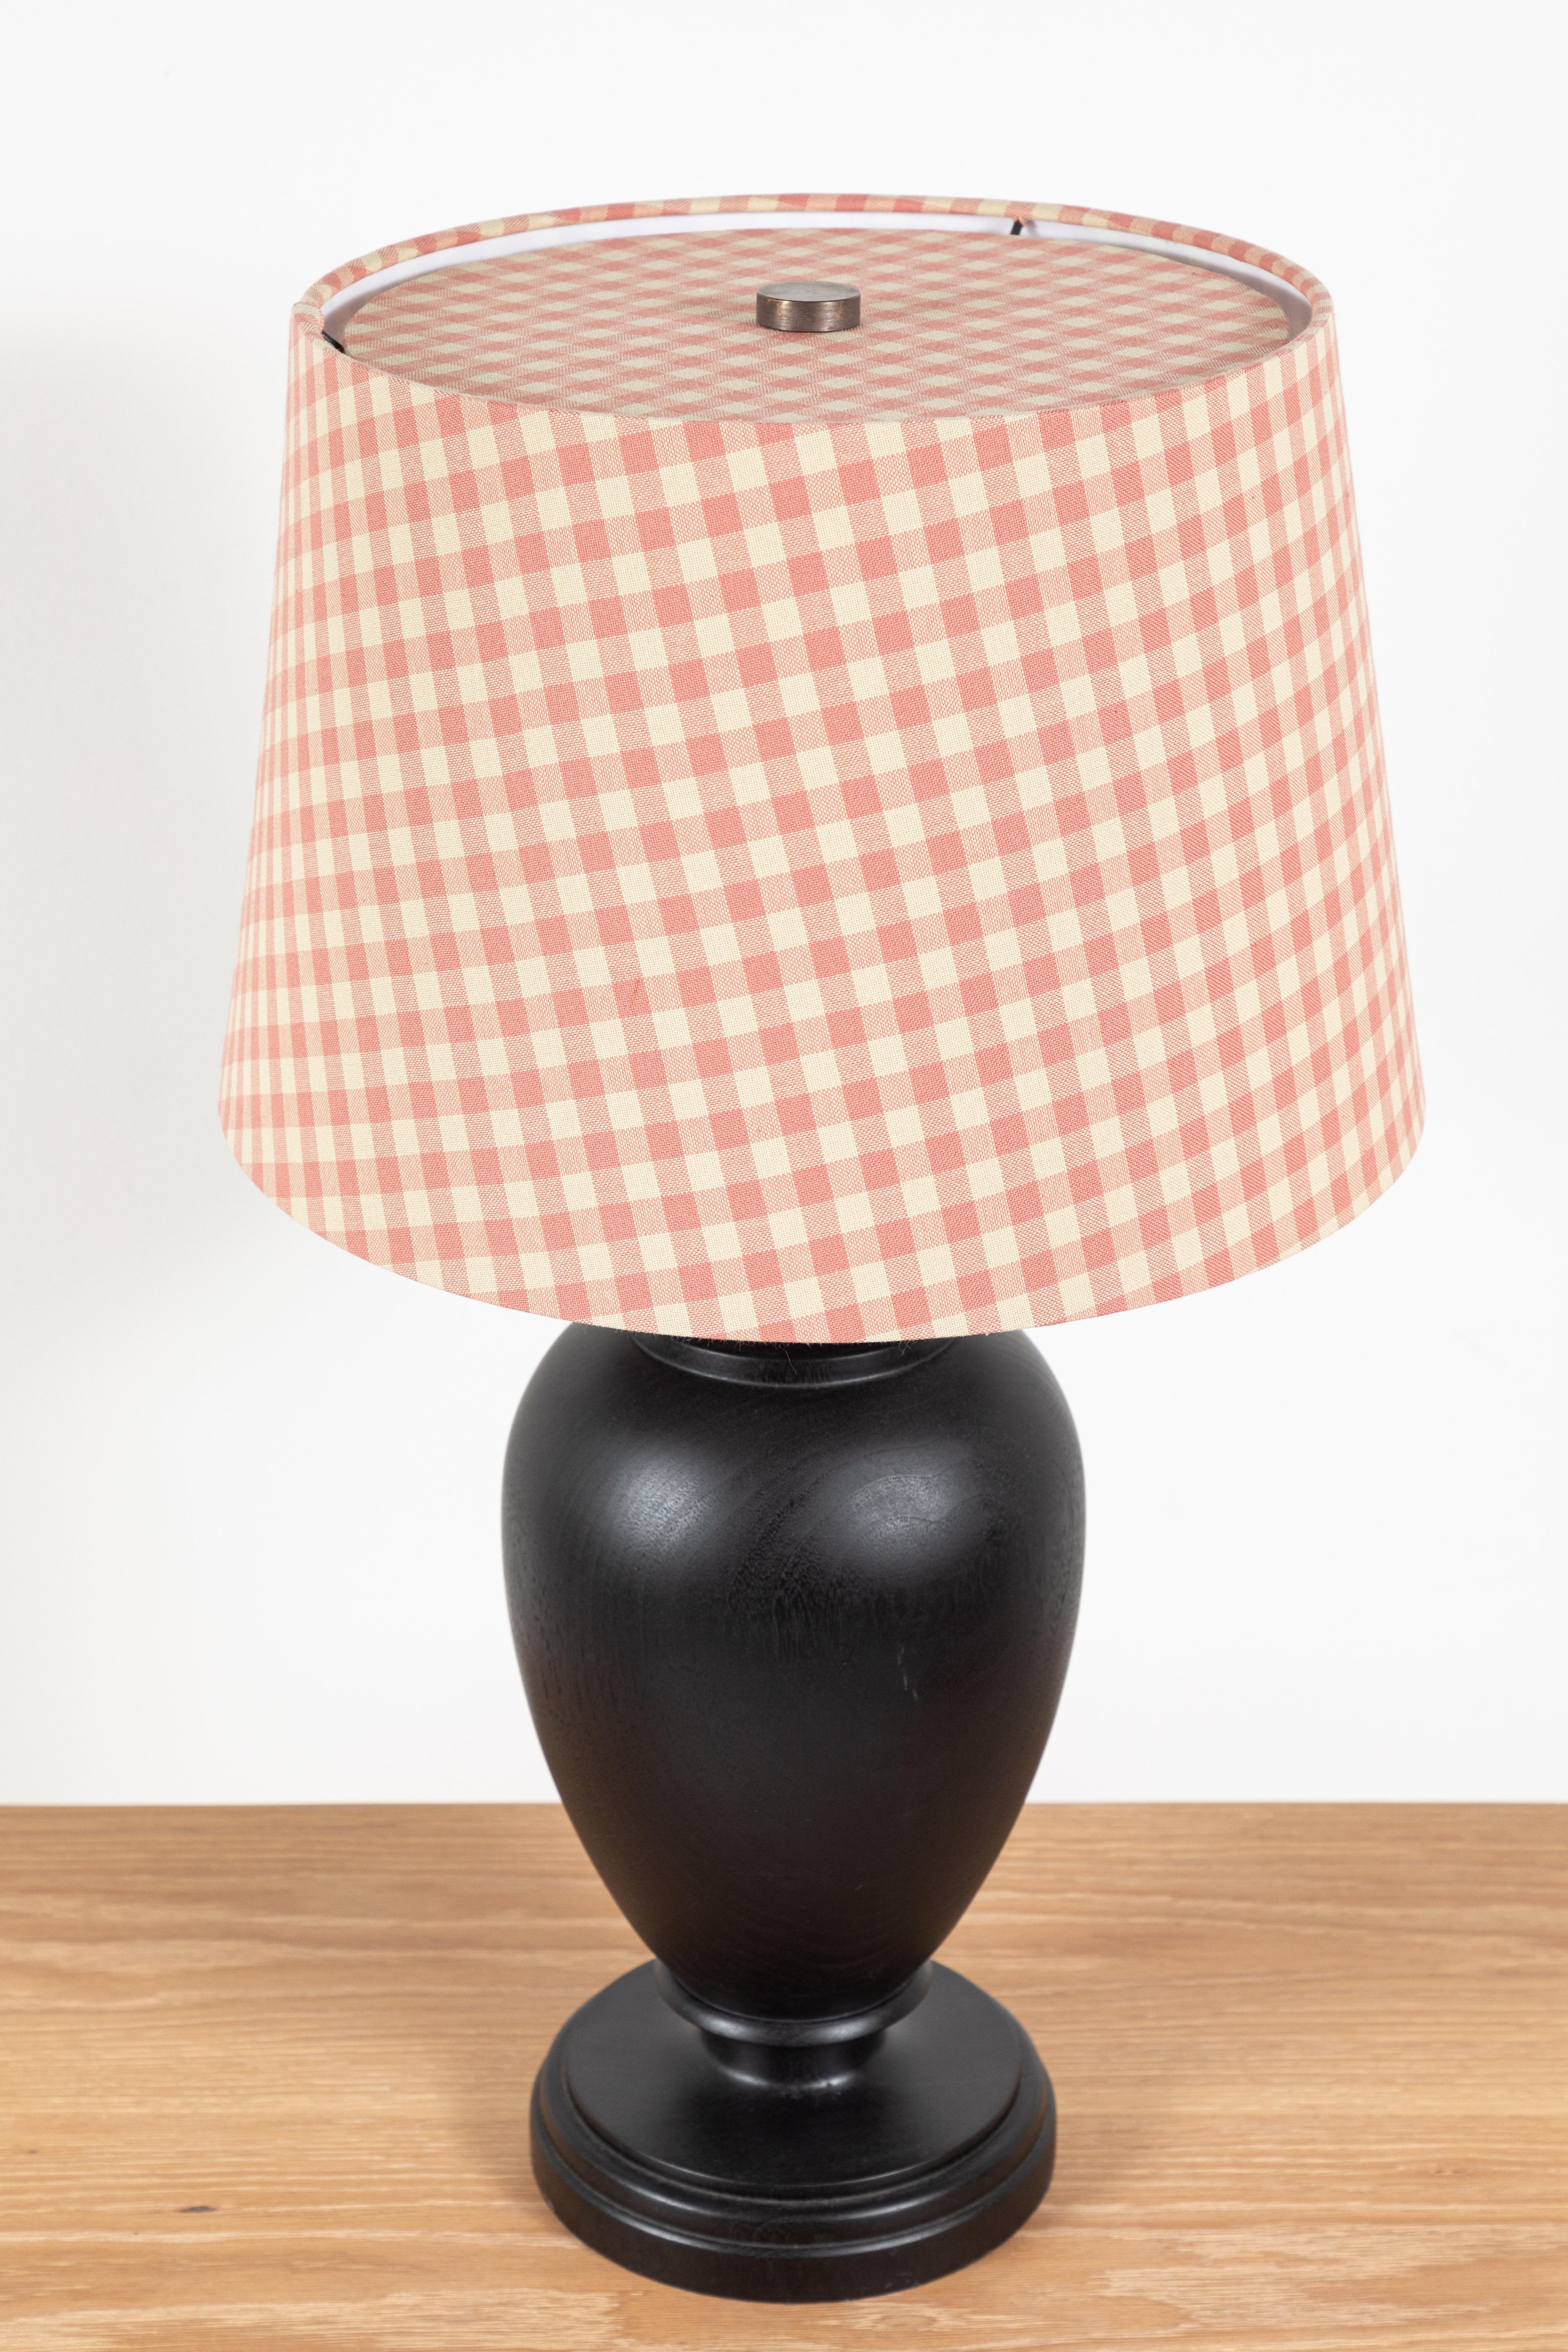 Nickey Kehoe Collection black stained urn table lamp with custom pink plaid shade. The wooden base is intricately hand turned and stained in Los Angeles. The lamp base measures: 7